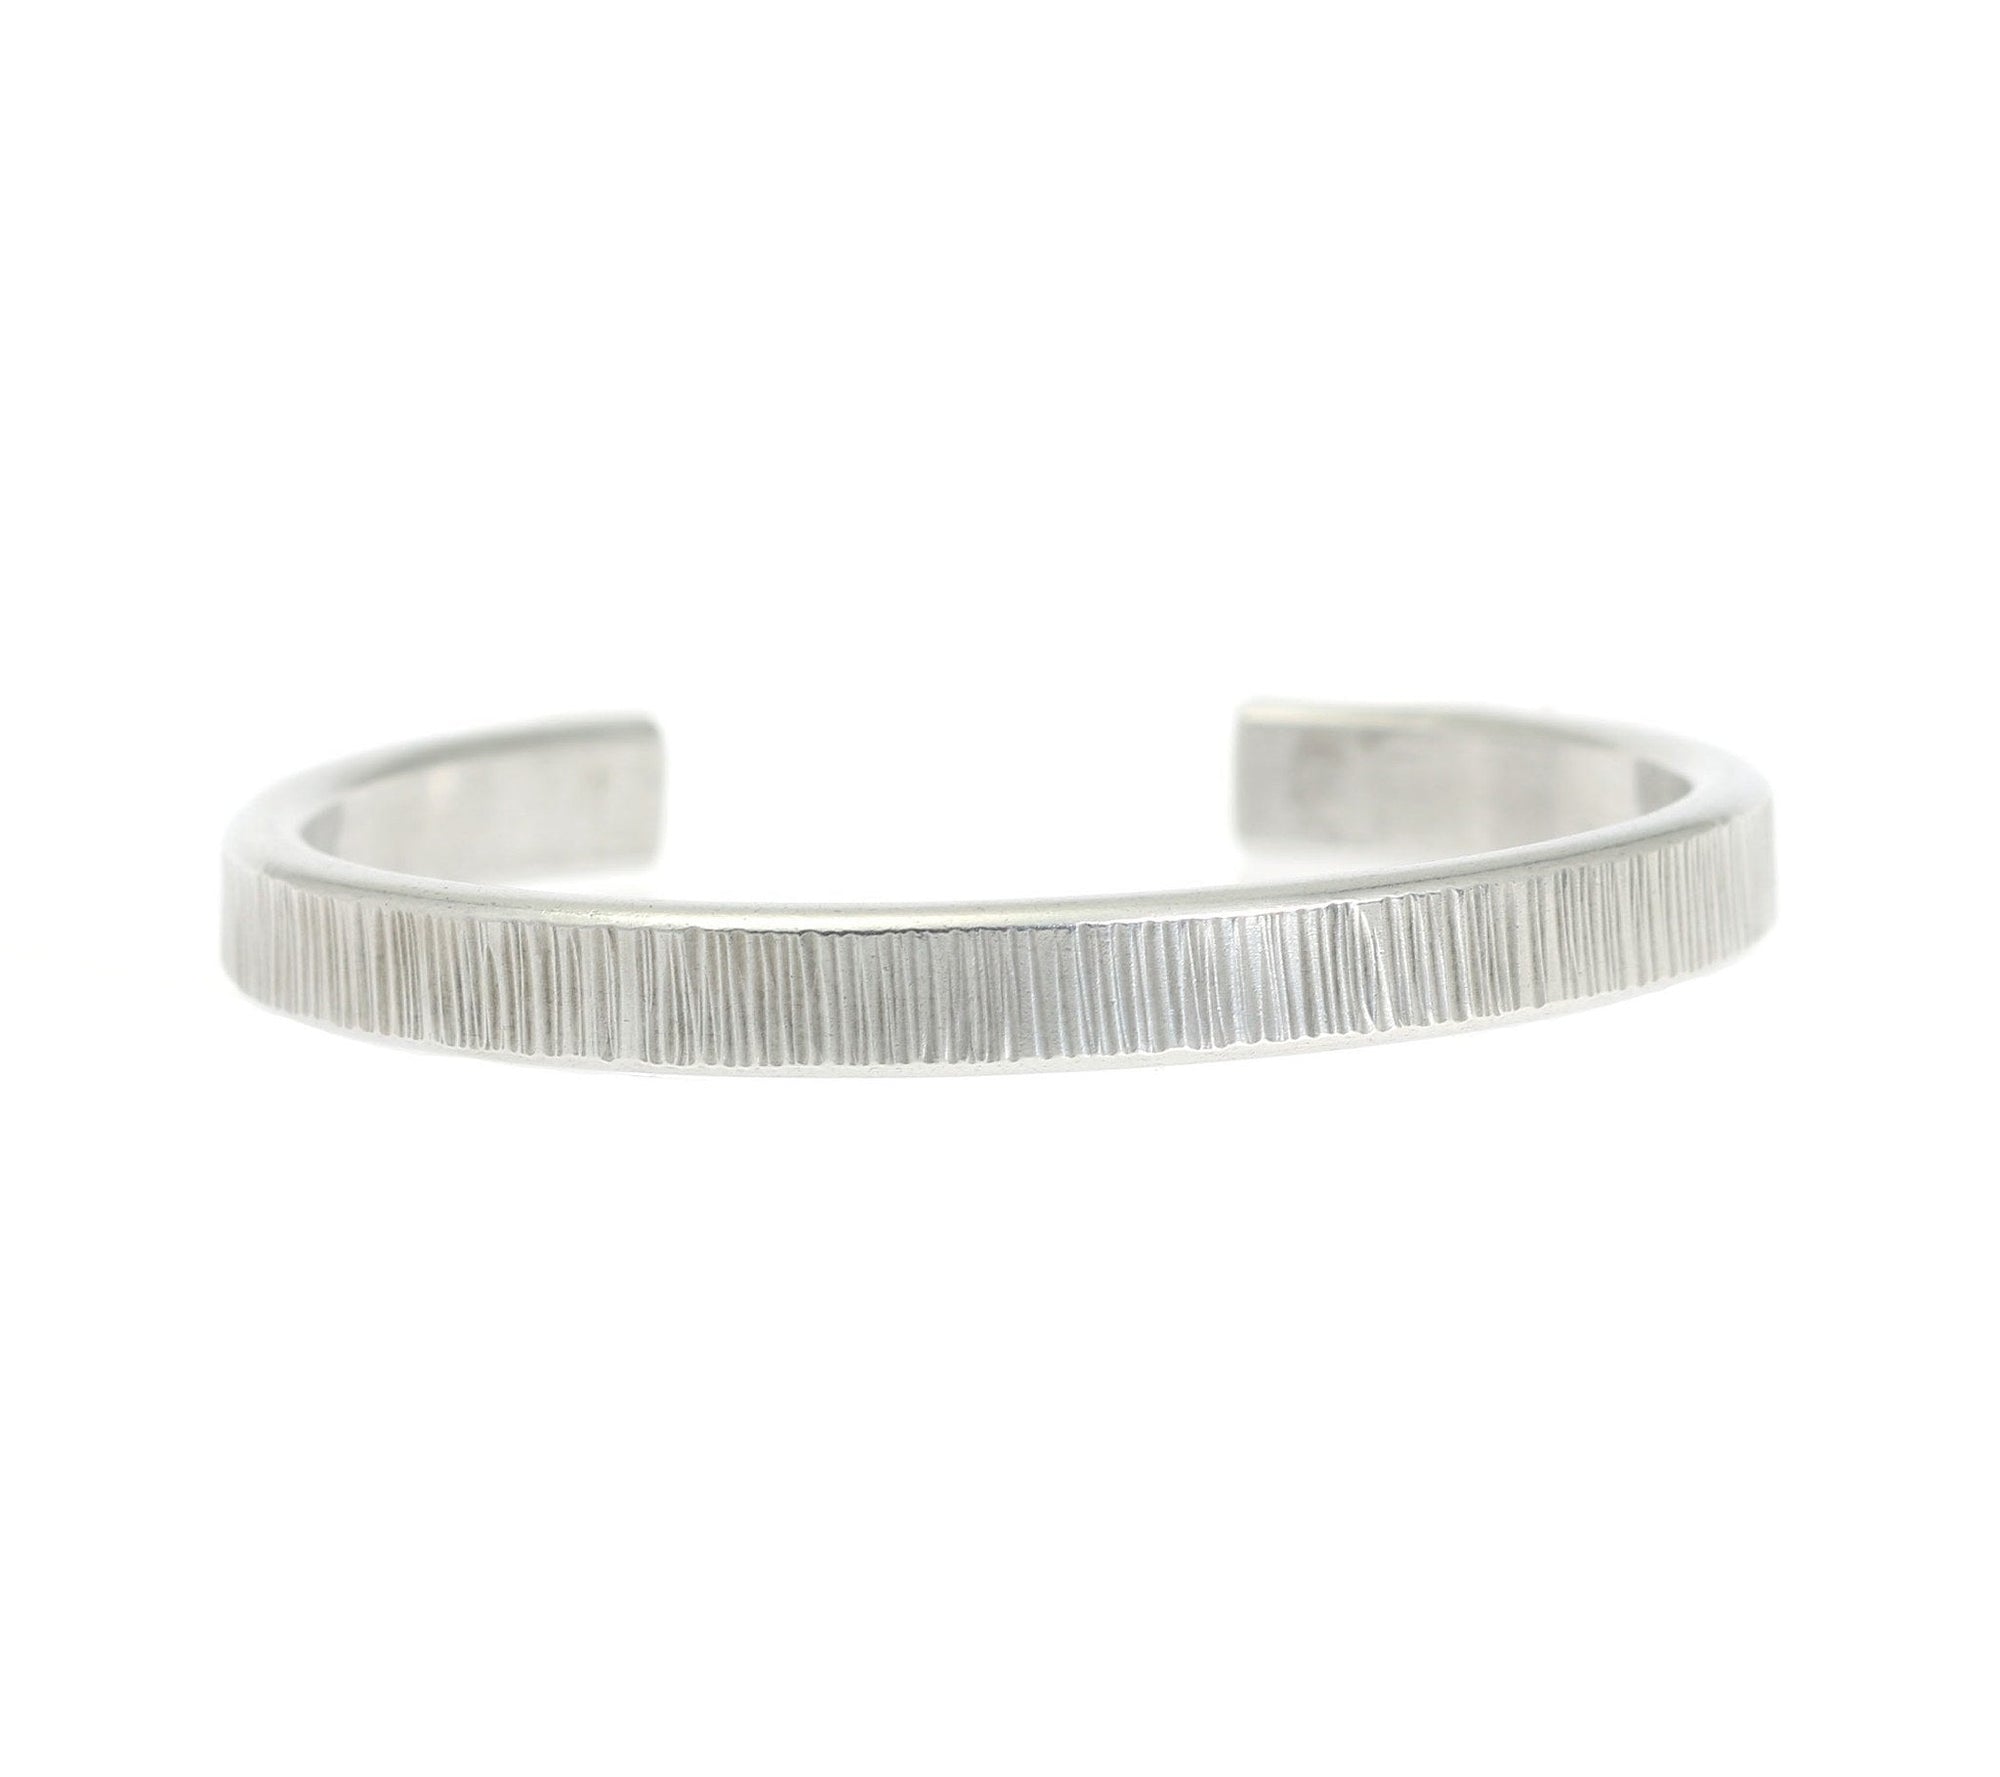 Detailed View of Thin Chased Aluminum Cuff Bracelet